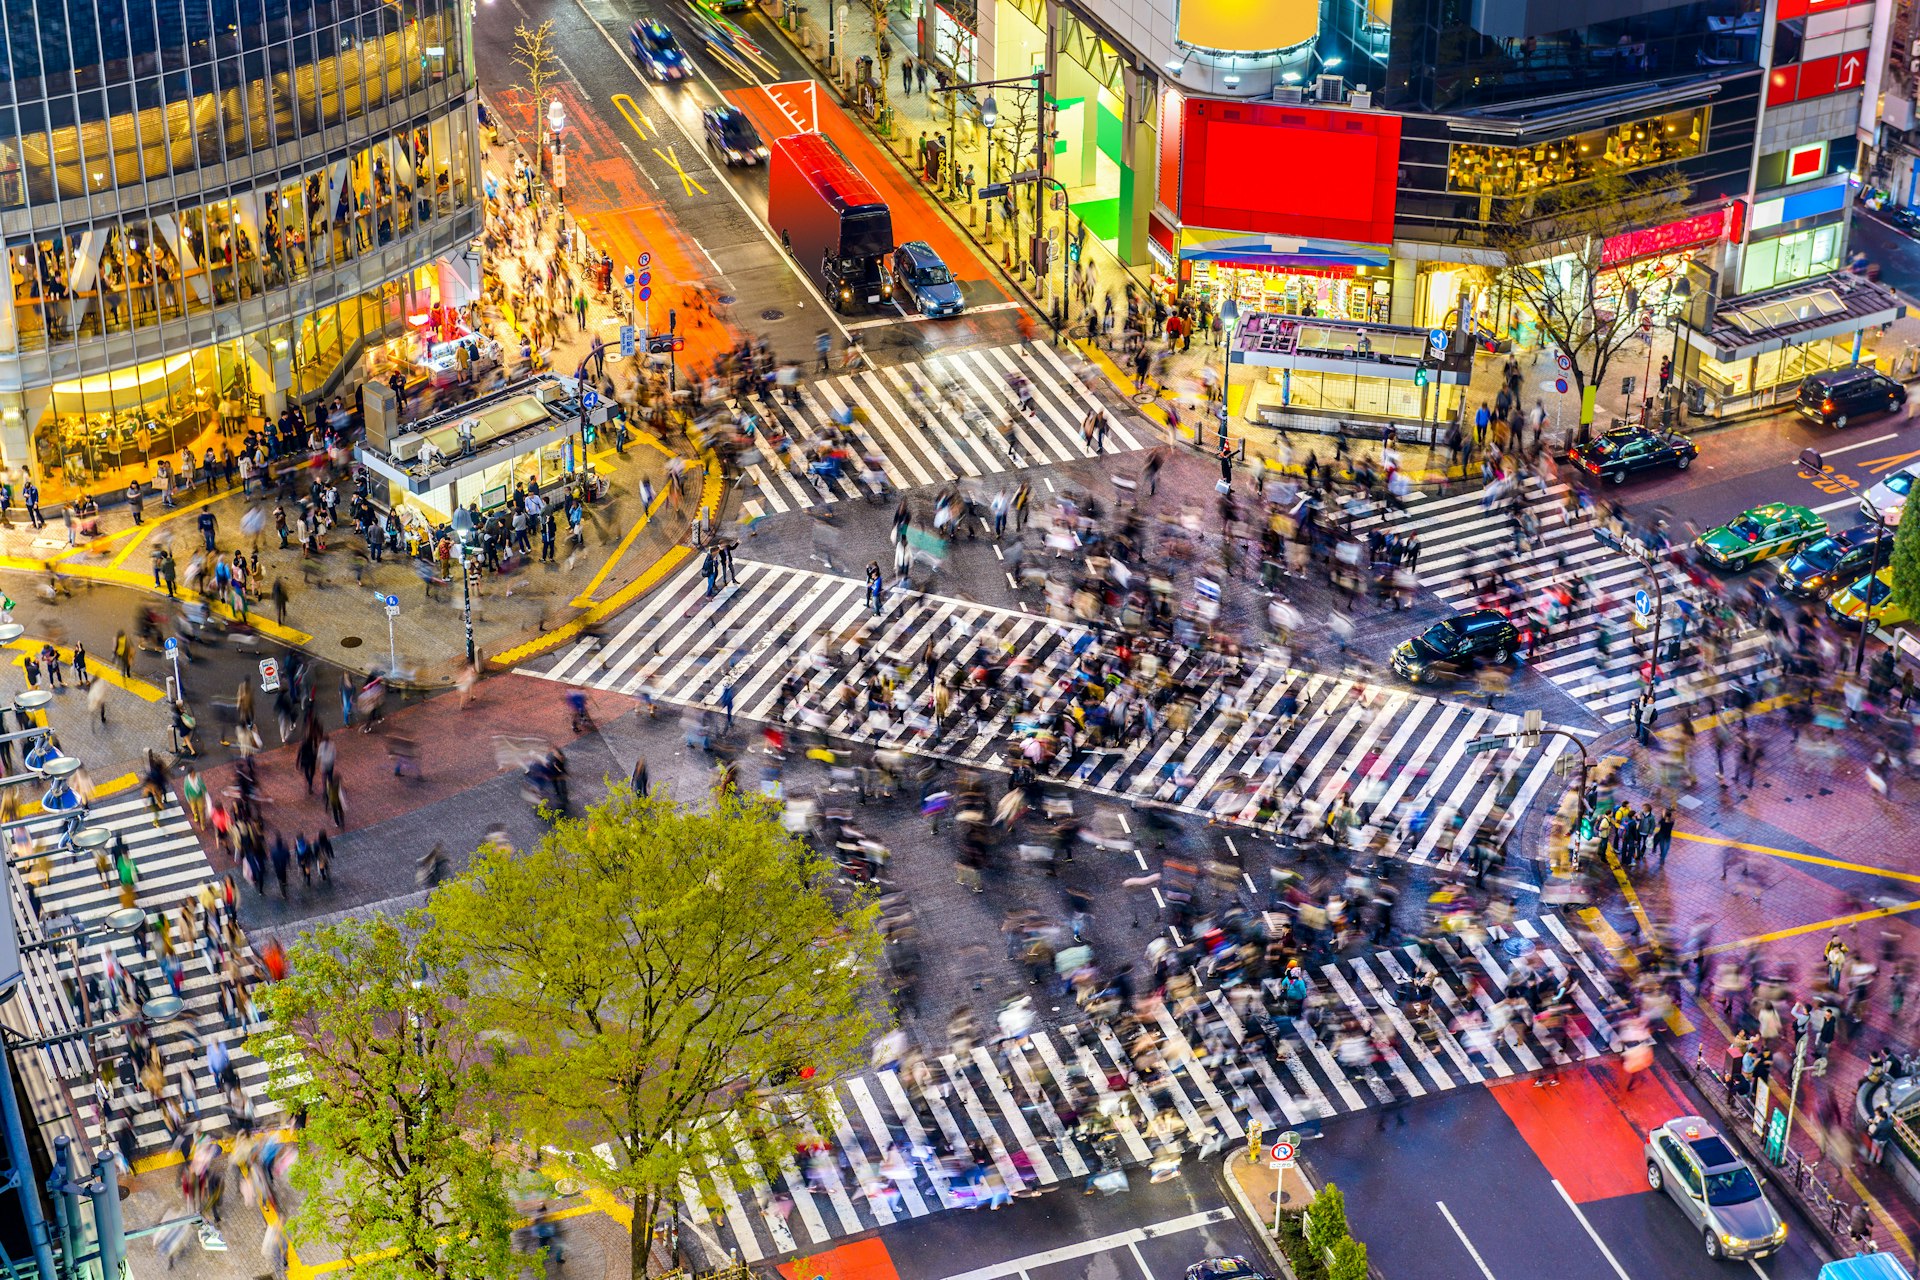 An aerial view of the Shibuya Crossing, one of the busiest crosswalks in the world, with the lit up buildings around it